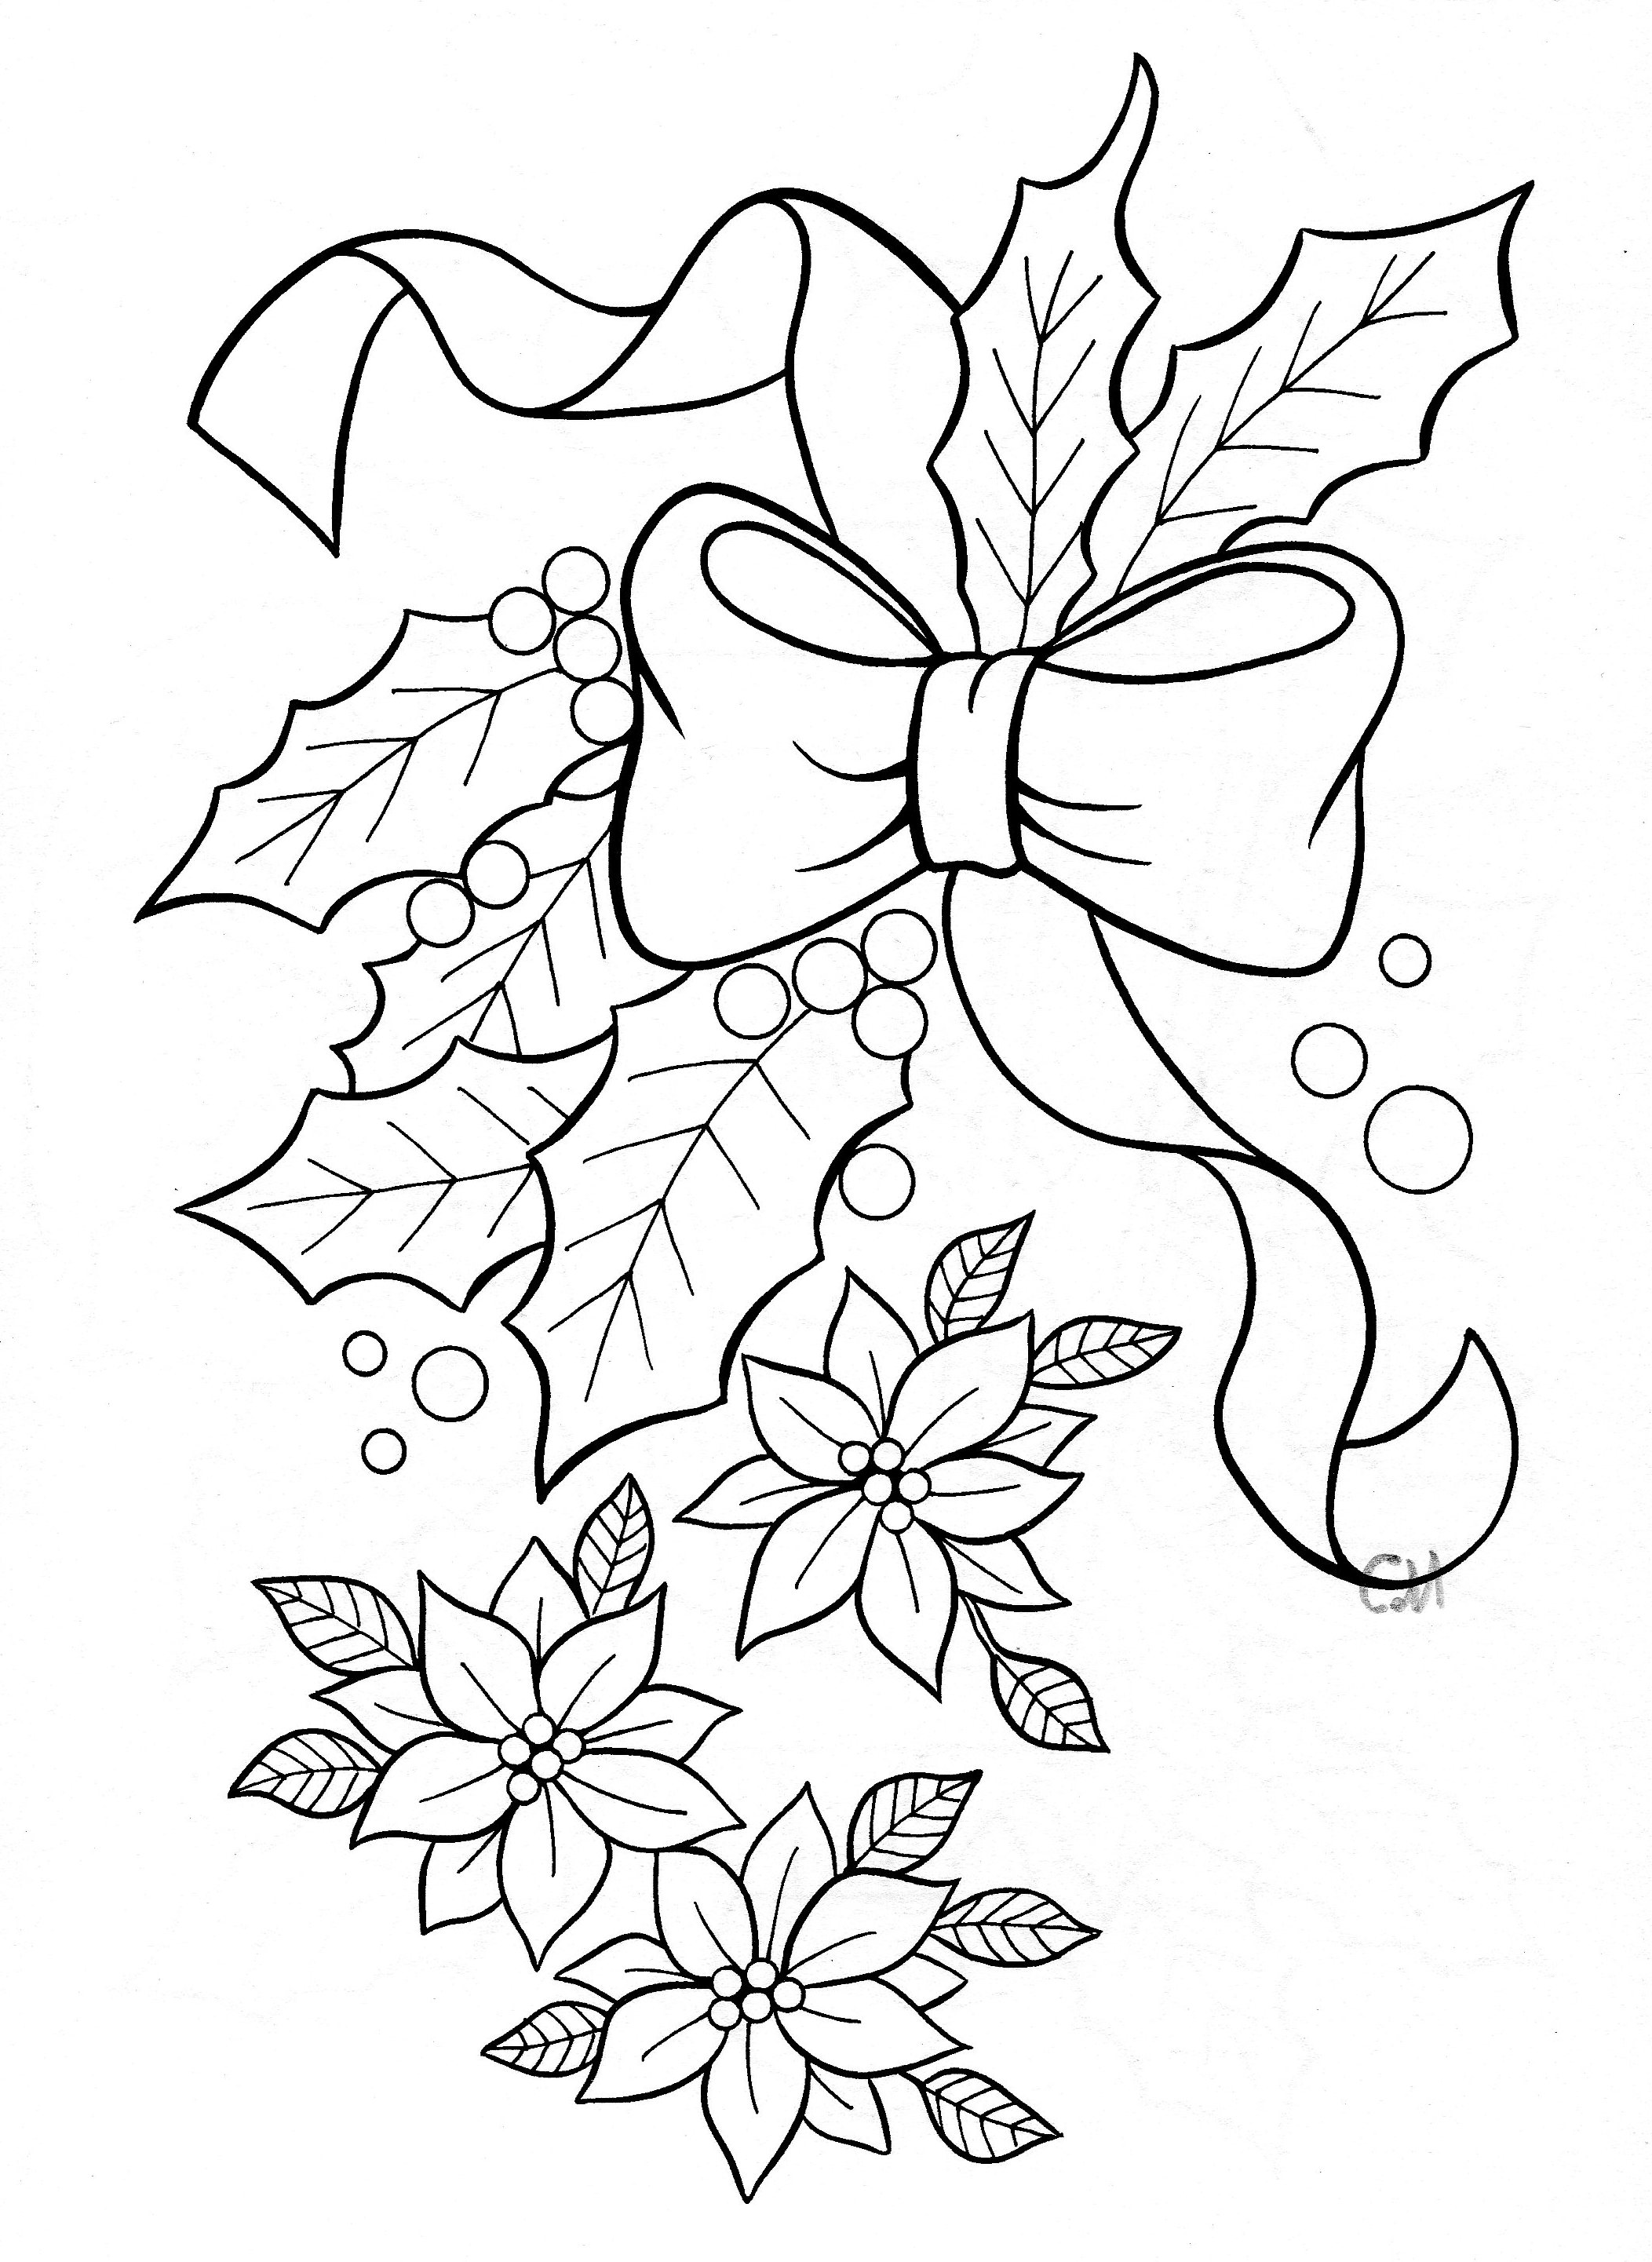 Christmas Mistletoe Coloring Pages at Free printable